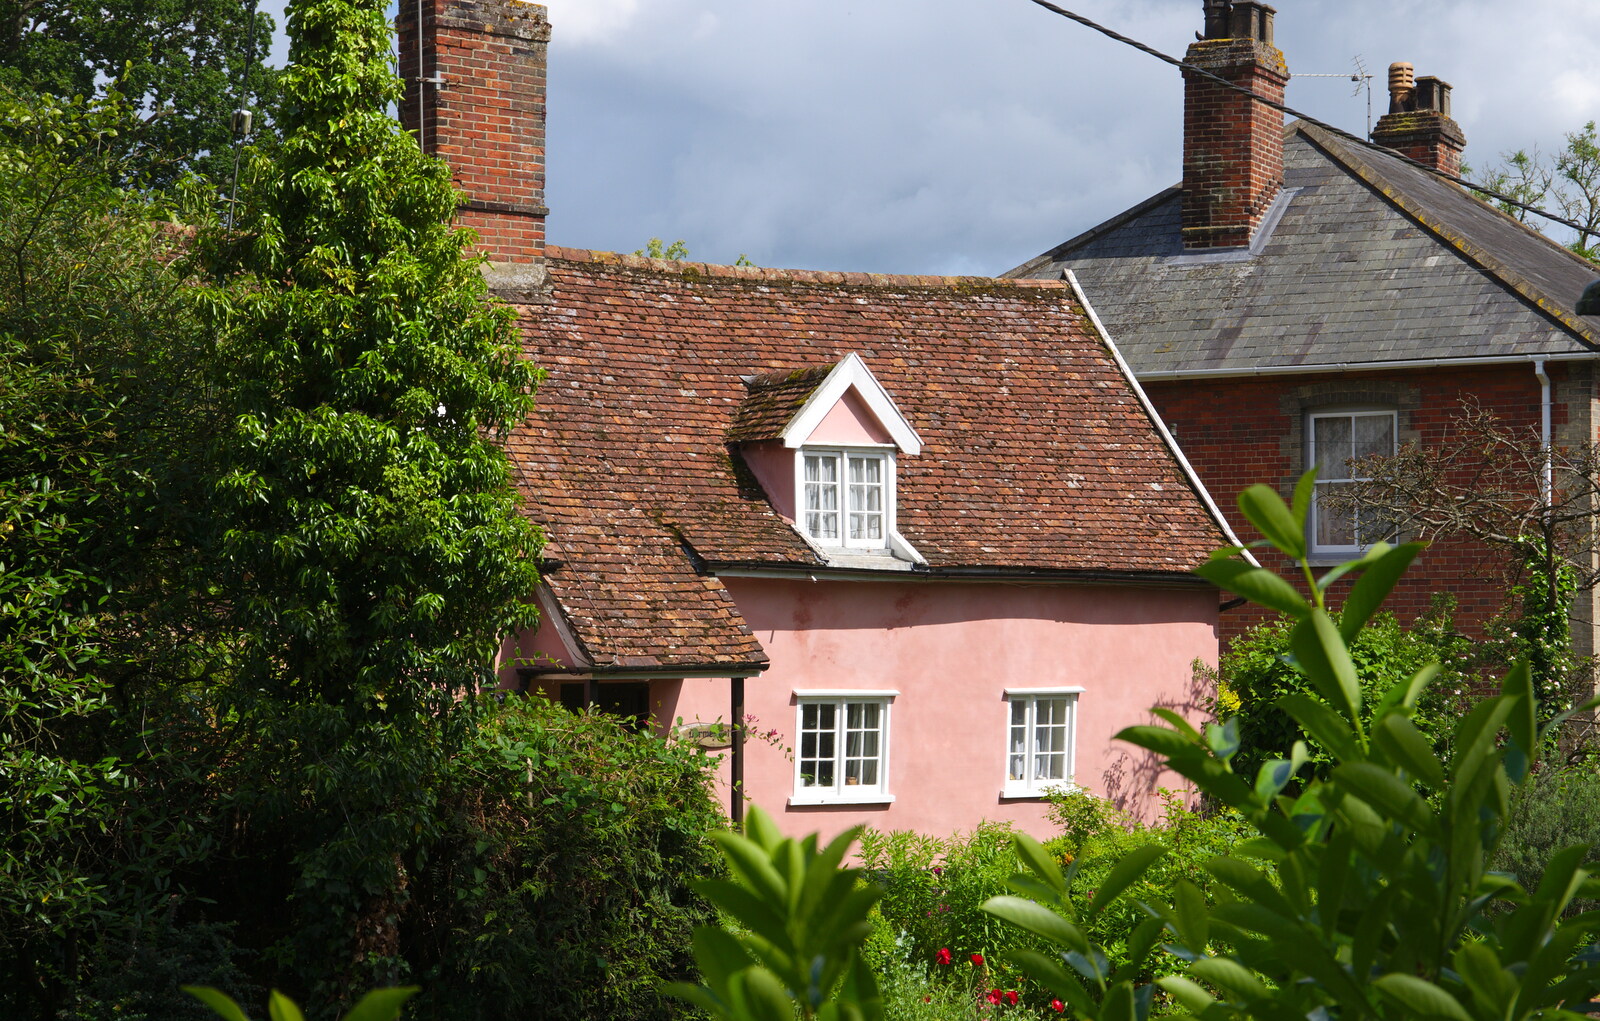 A nice cottage on Victoria Hill from The Diss Carnival 2019, Diss, Norfolk - 9th June 2019